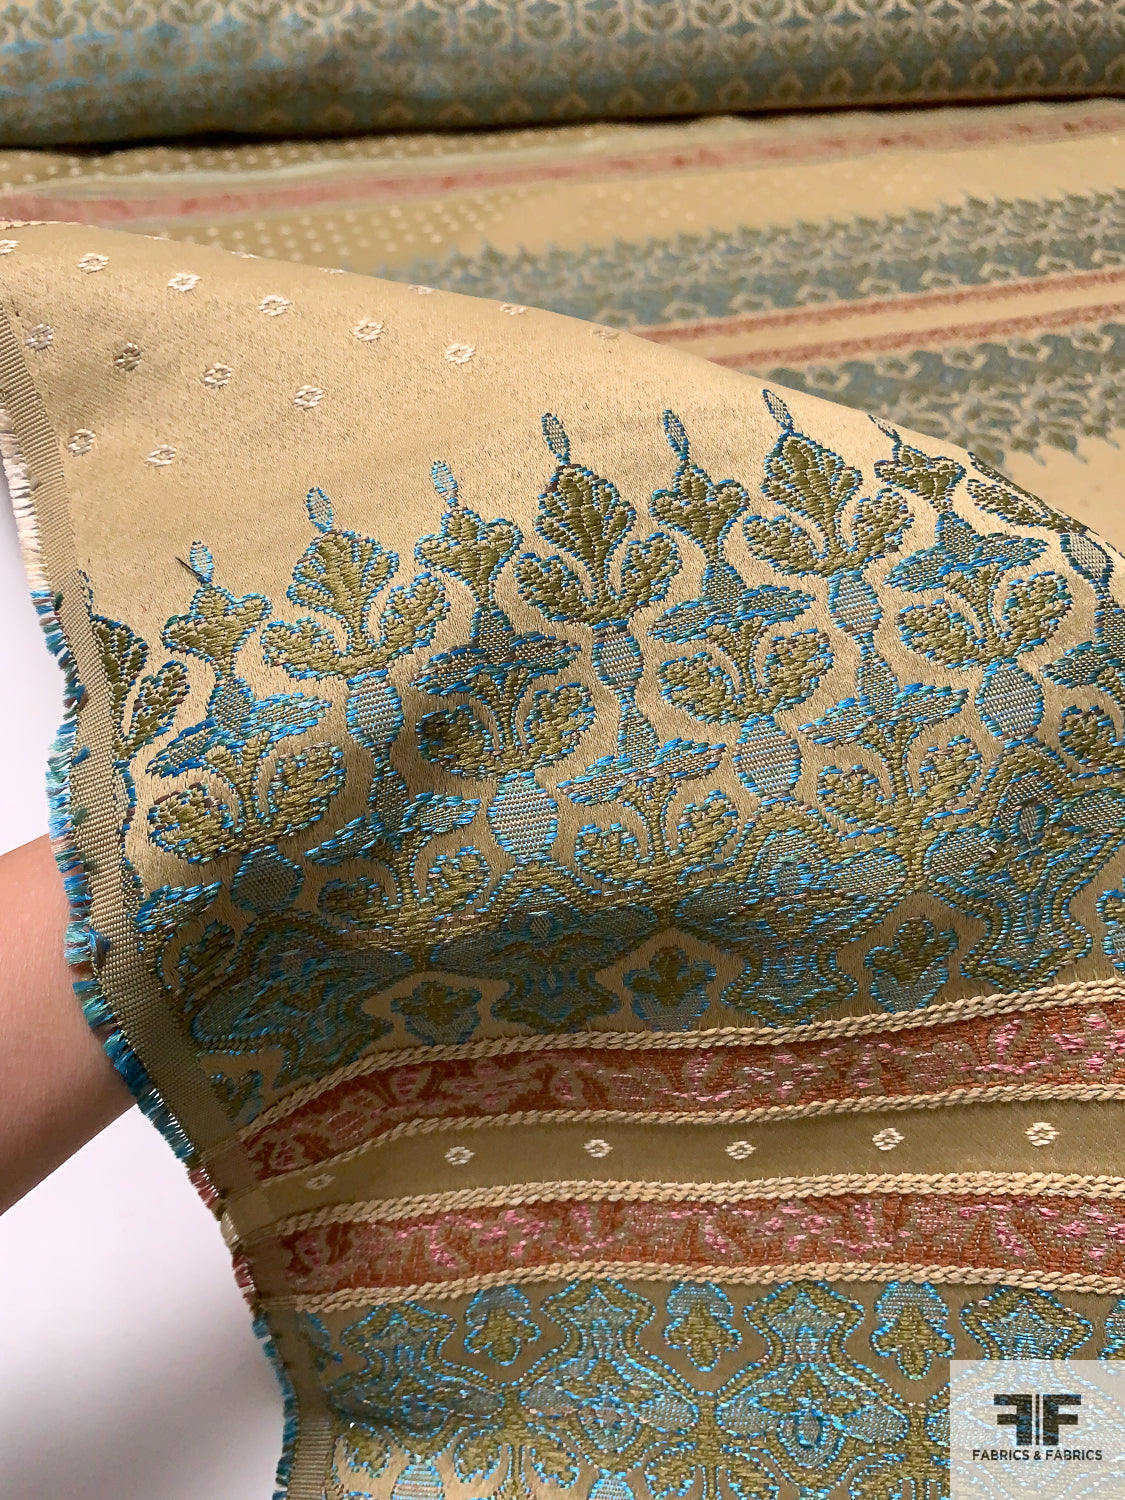 Antique-Look Upholstery Weight Brocade - Ecru / Turquoise / Antique Red